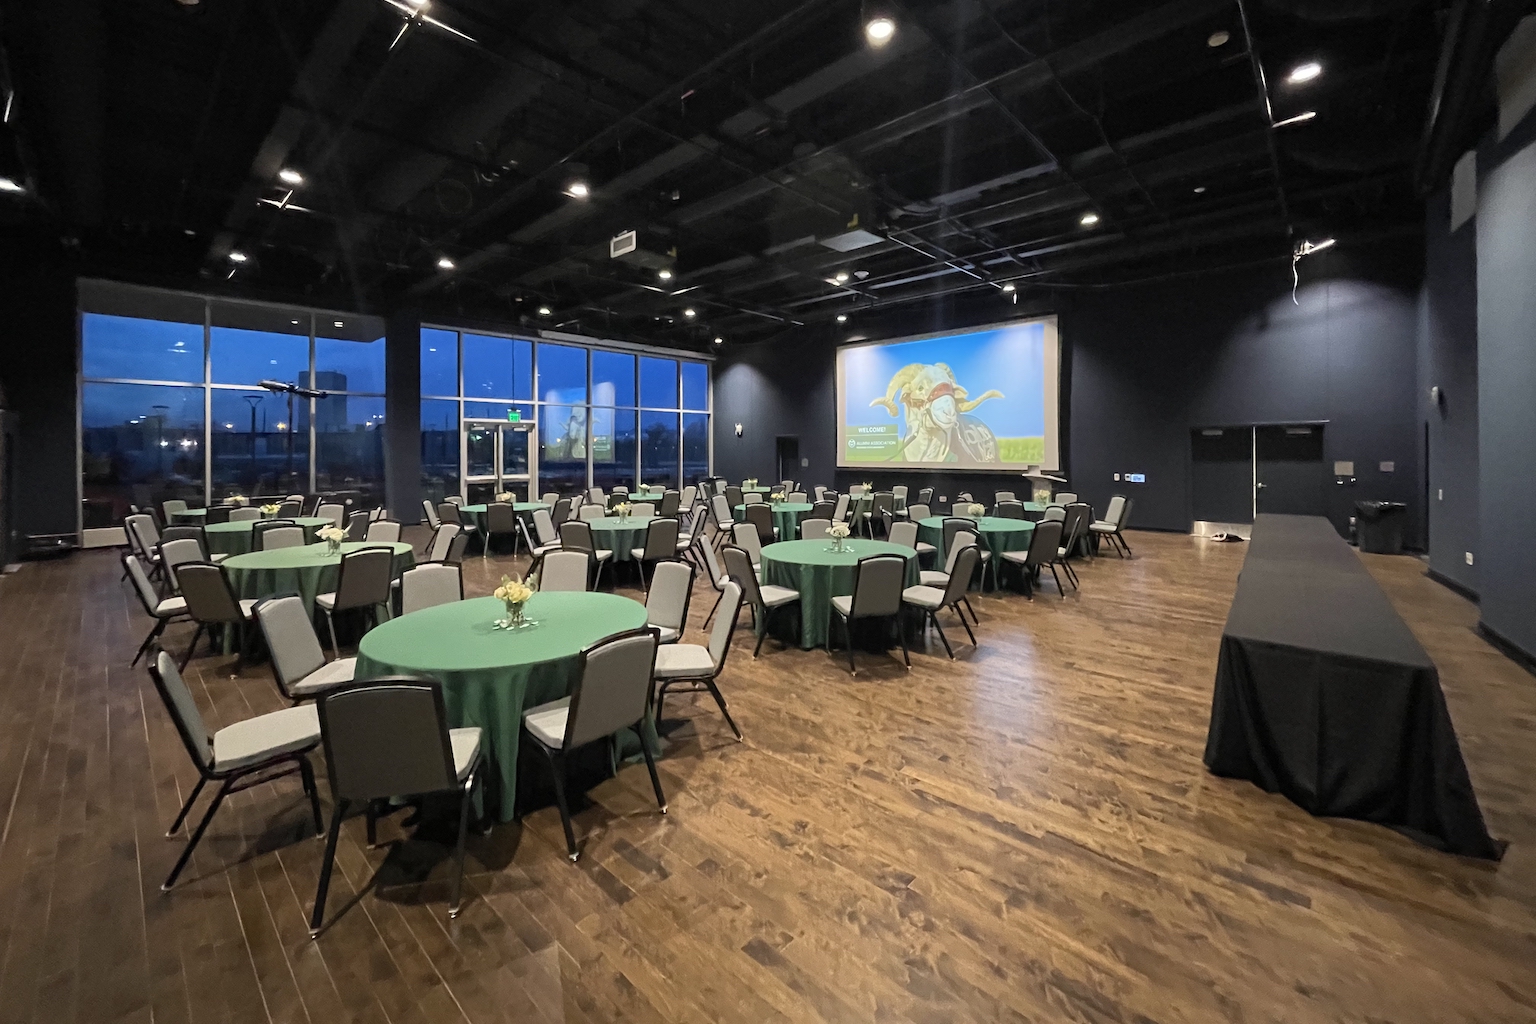 Theater space with wood flooring and large windows, set up with tables with green tablecloths.